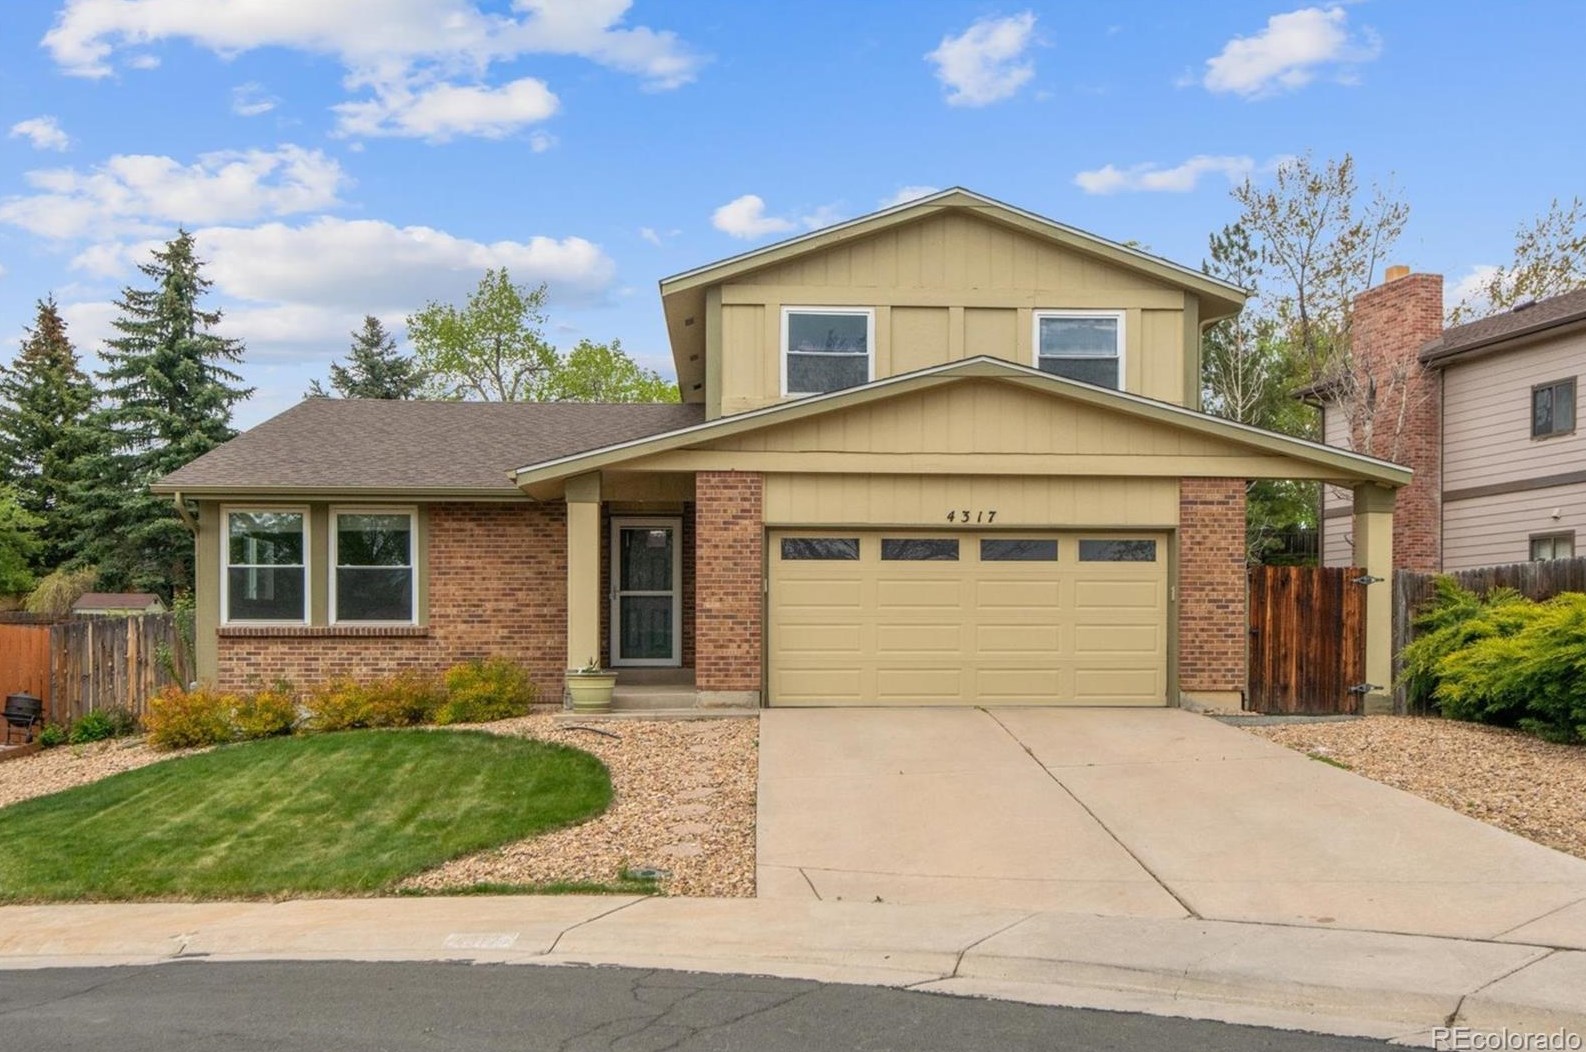 4317 W 110th Pl, Westminster, CO 80031